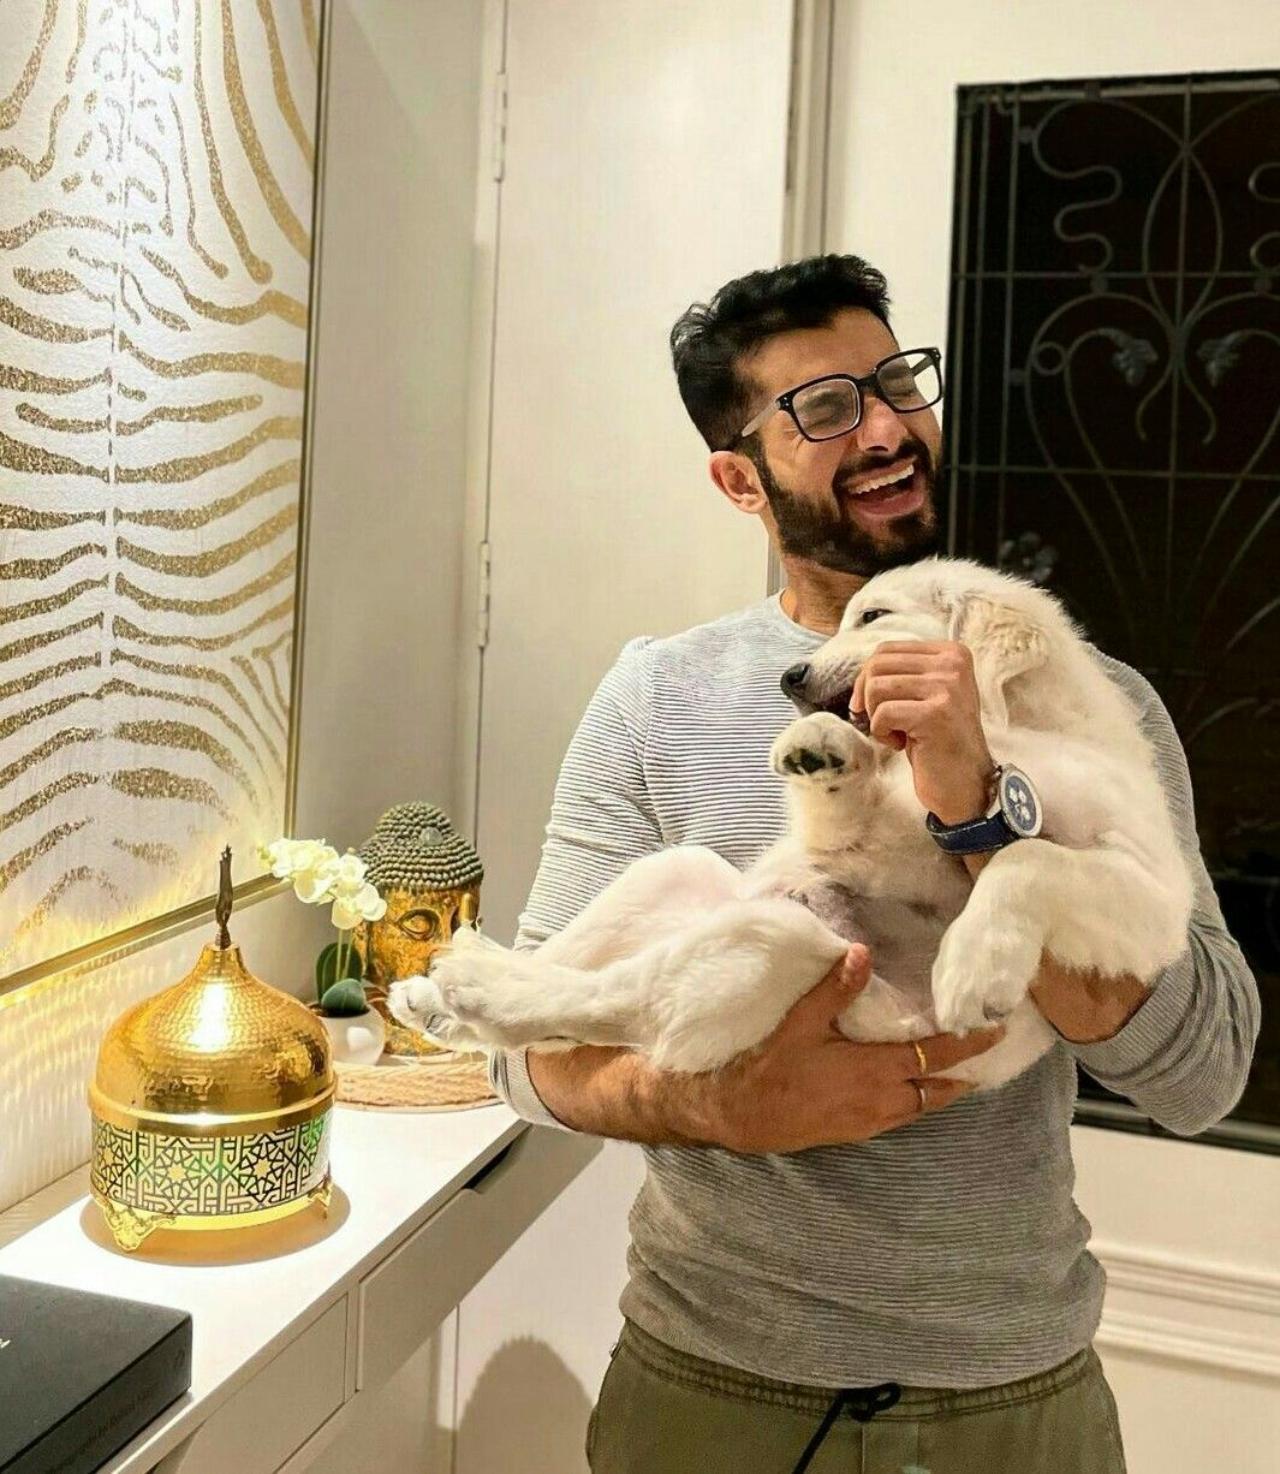 When Musky passed away in 2020, Sharad Malhotra shared how this loss had left a huge void in his and his wife Ripci's hearts, with whom he had shared ten years of his life. They then adopted a new furball, Leo - and the couple strongly believes that Musky has returned in the form of Leo to be with them in heart and spirit